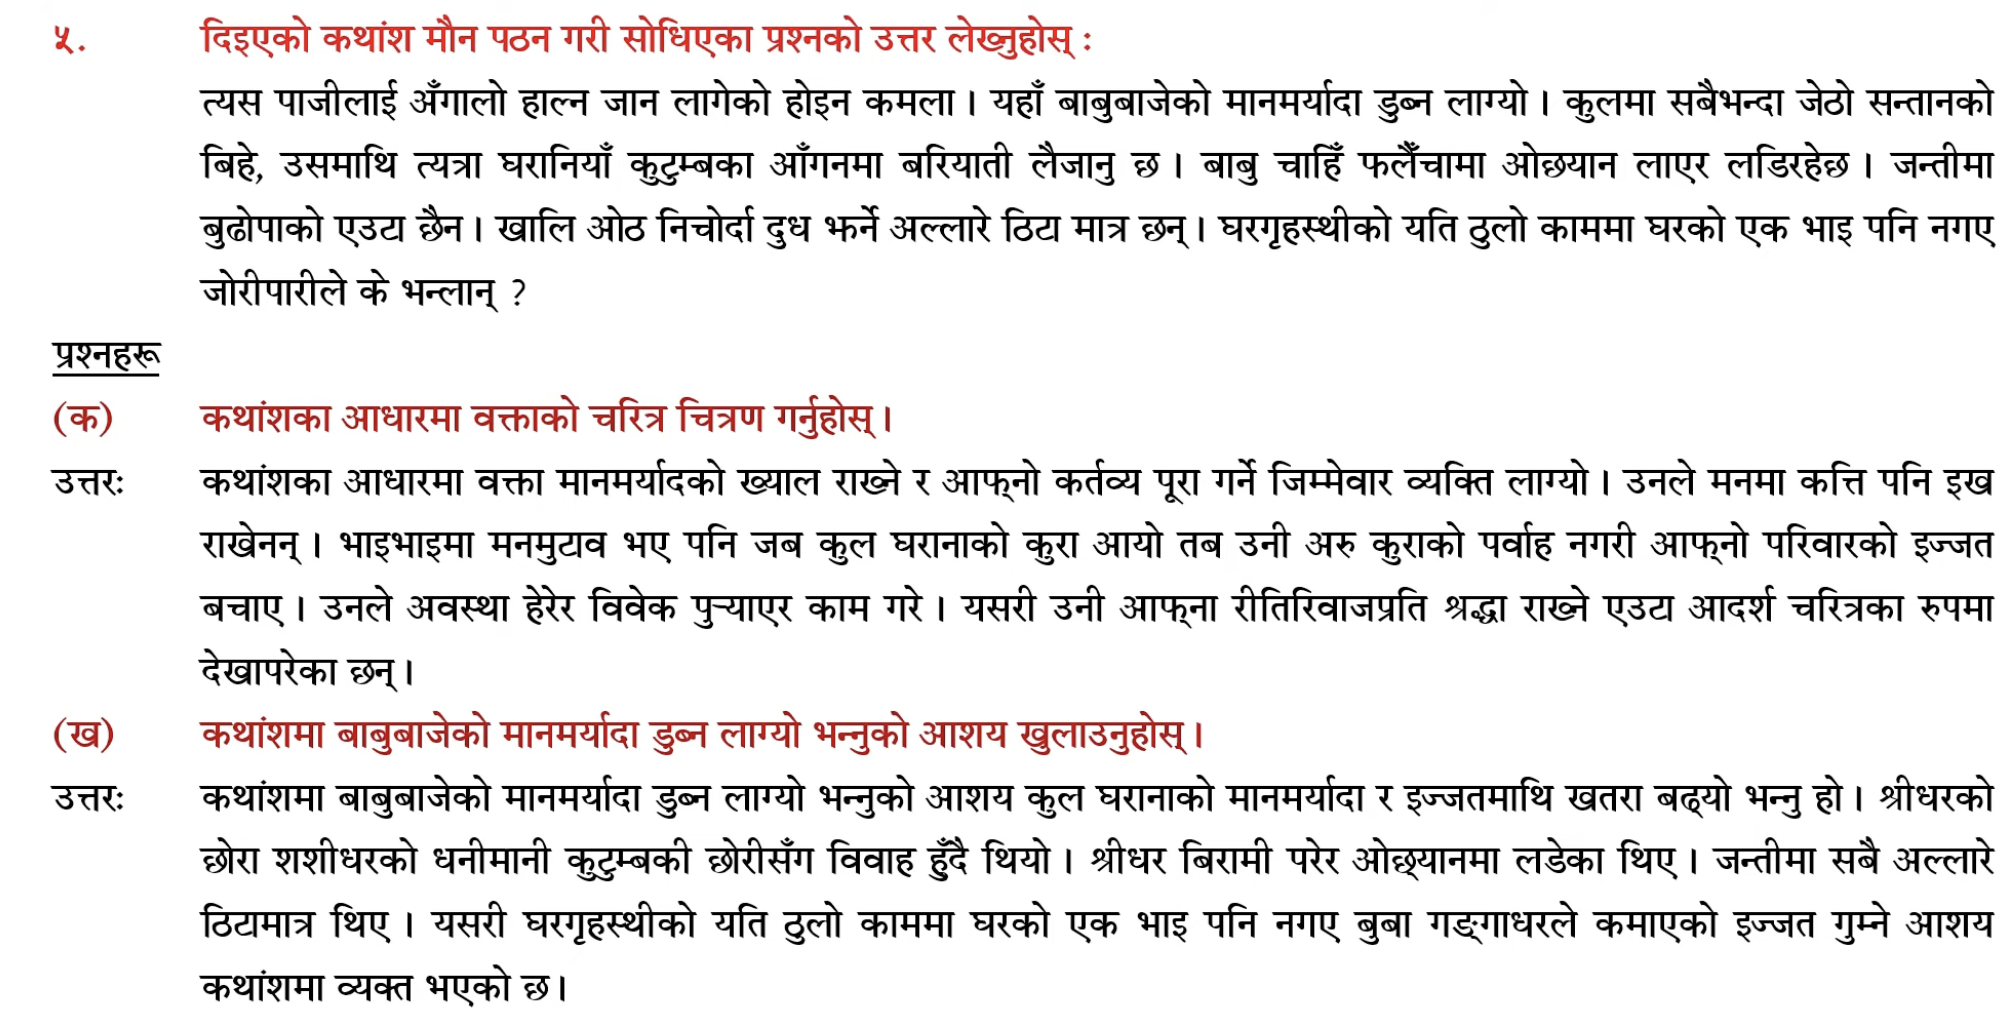 Kartabya Exercise: Class 10 Nepali Chapter 11 || Complete Questions and Answers